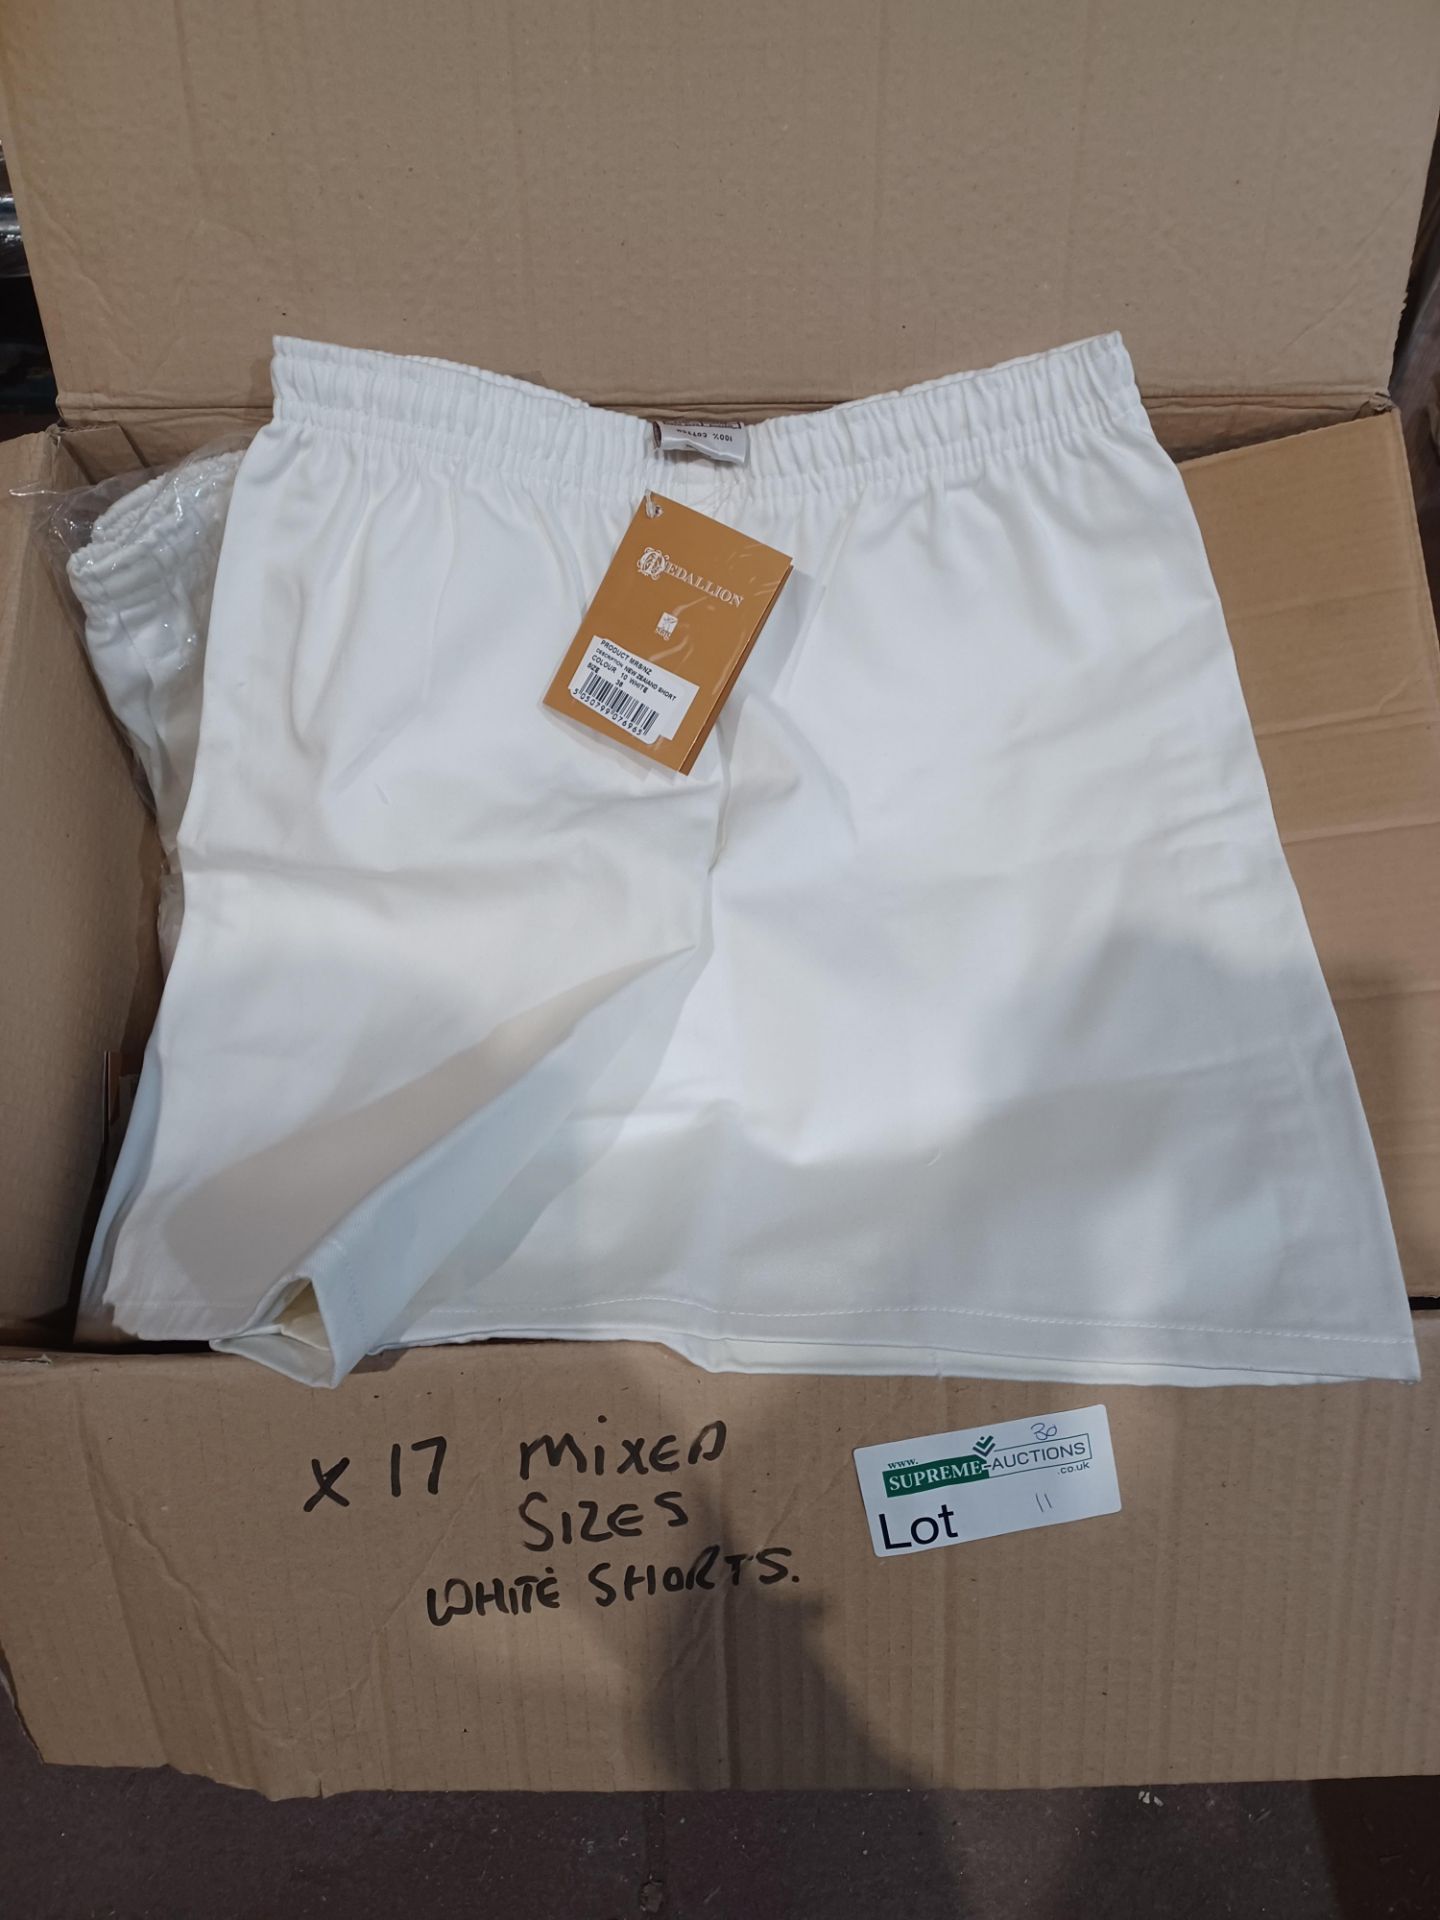 17 x Medallion New Zeal White Cotton Shorts in Mixed Sizes. - RRP £21.99 each . - R14